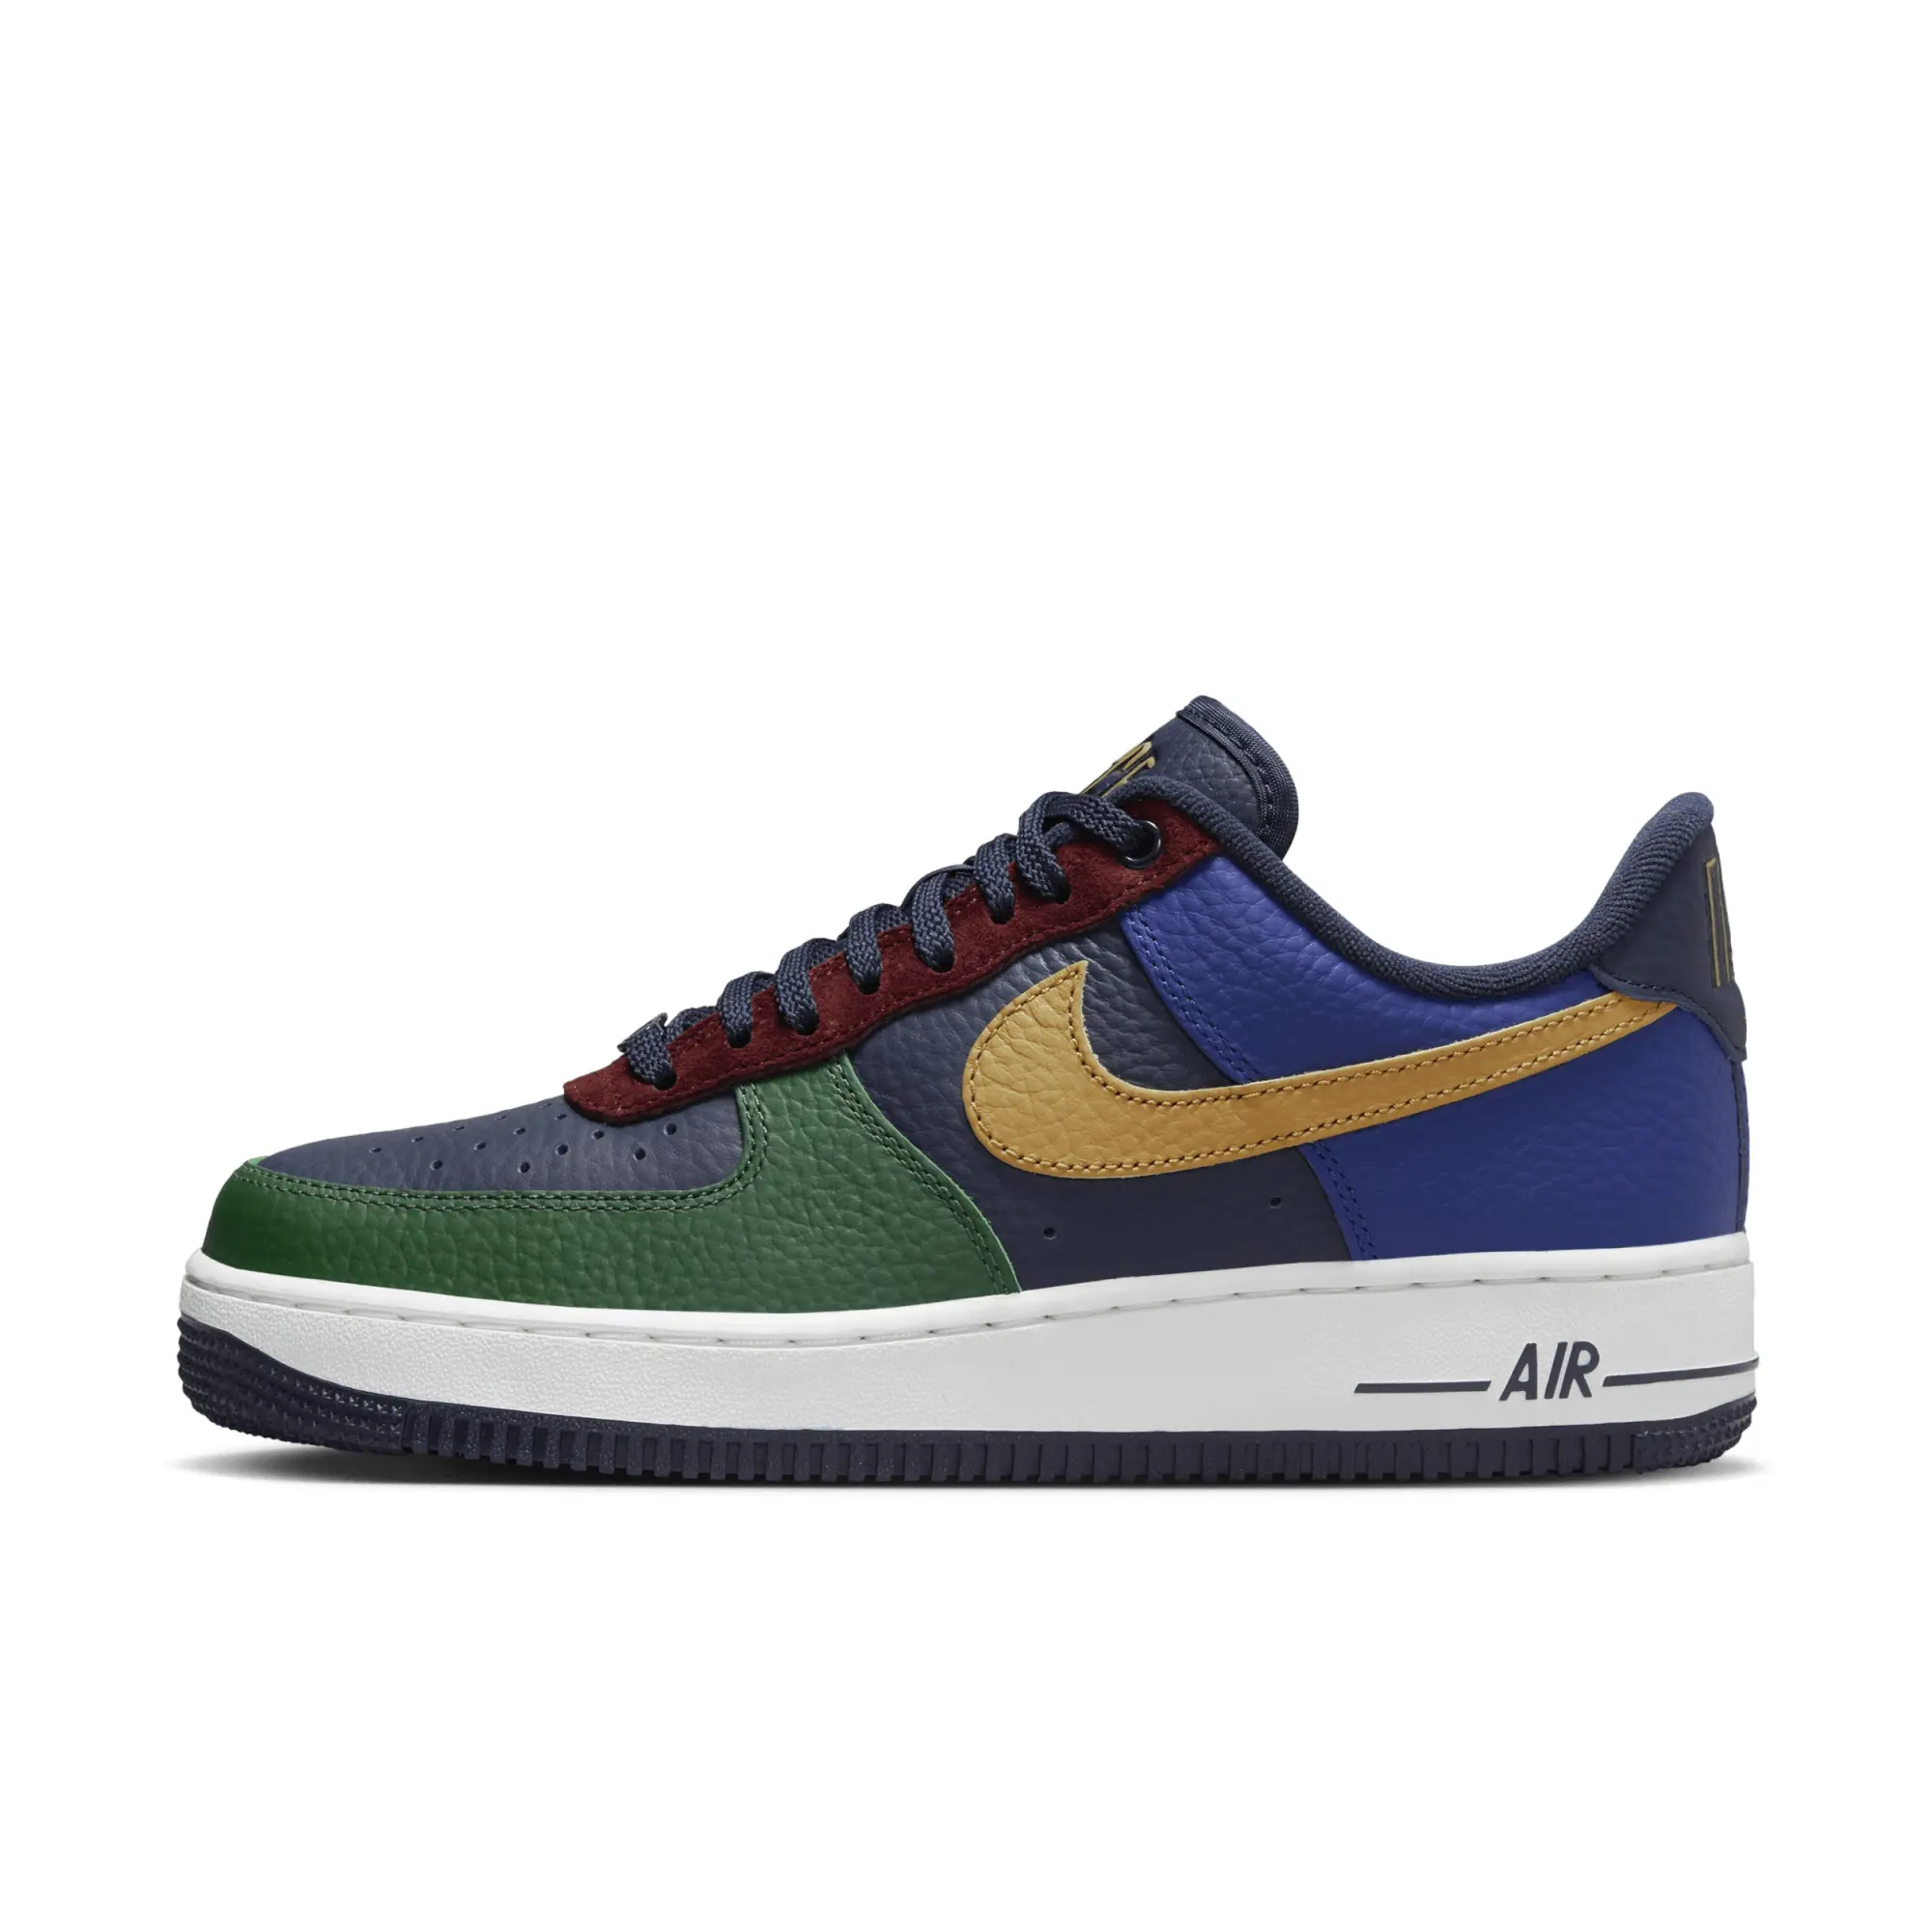 Nike Air Force 1 Low Multi Tumbled Leather